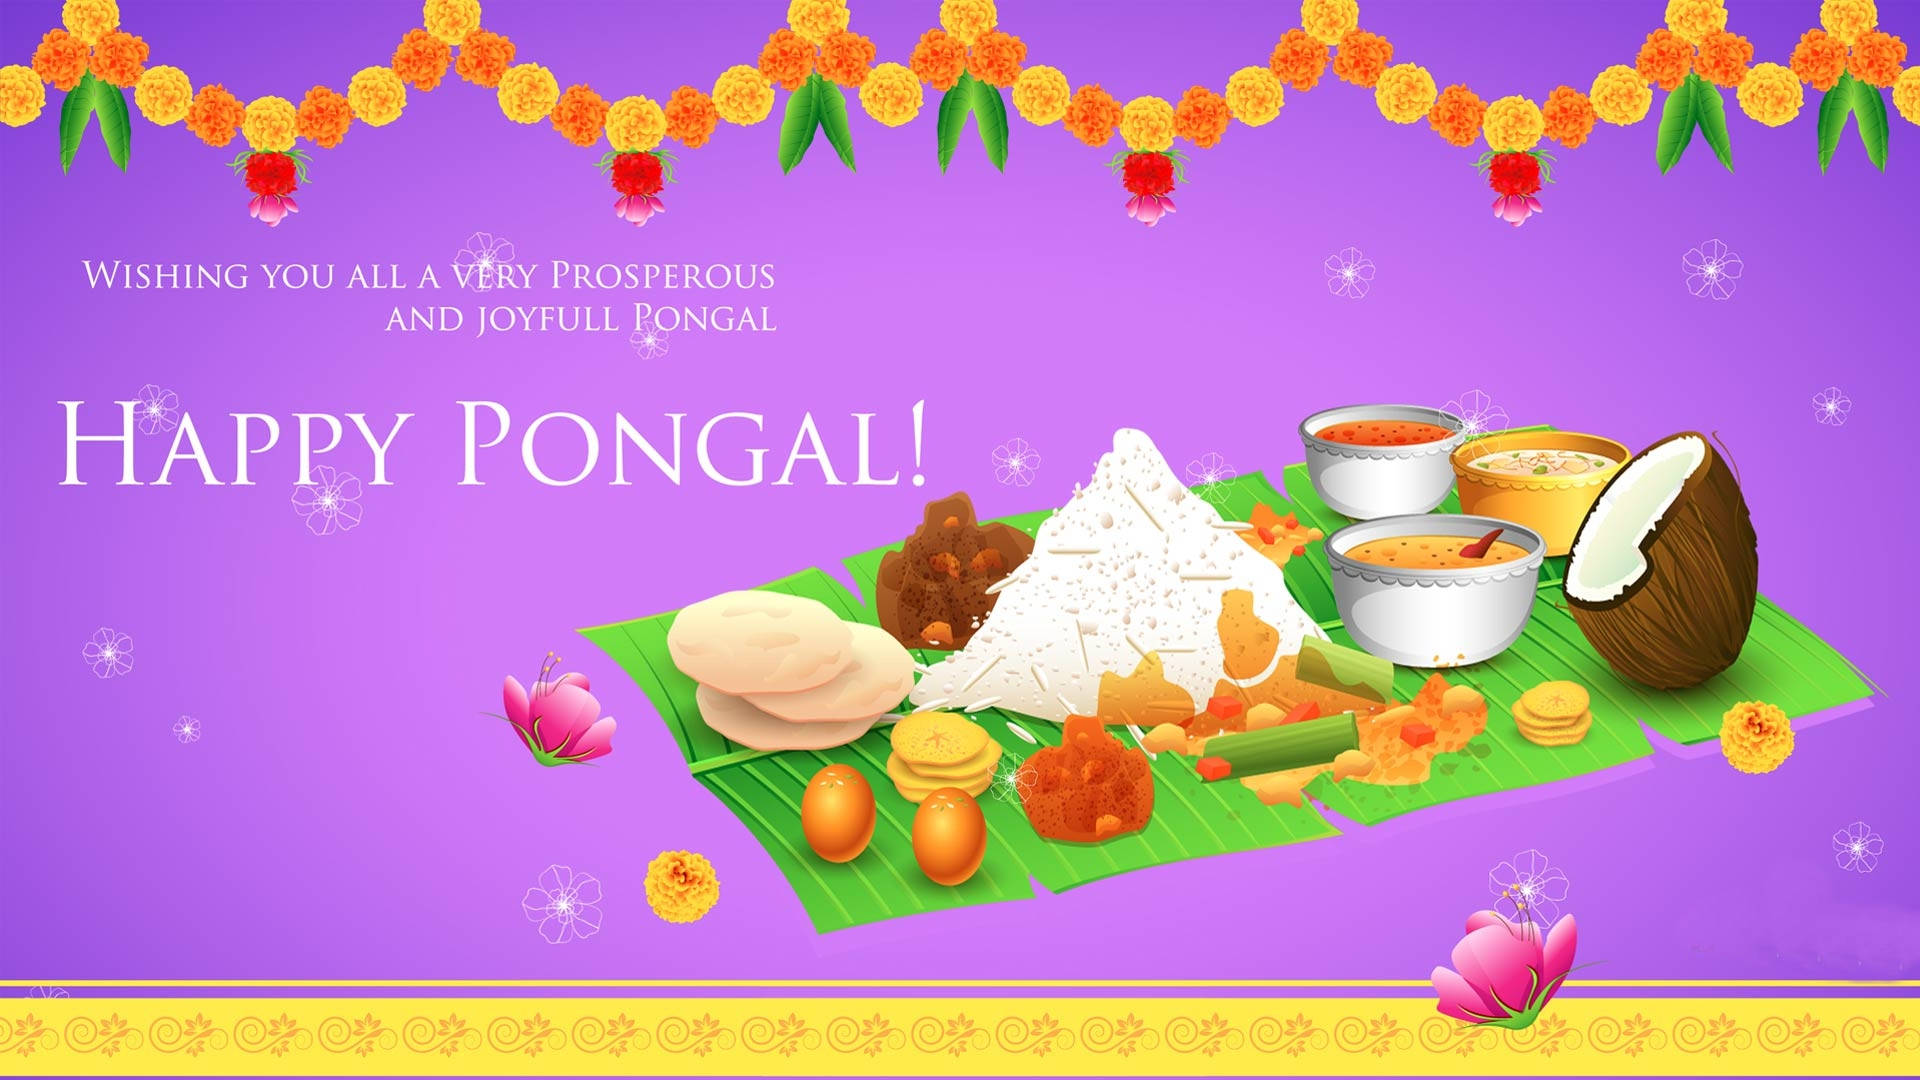 Happy Pongal Publication Material Background